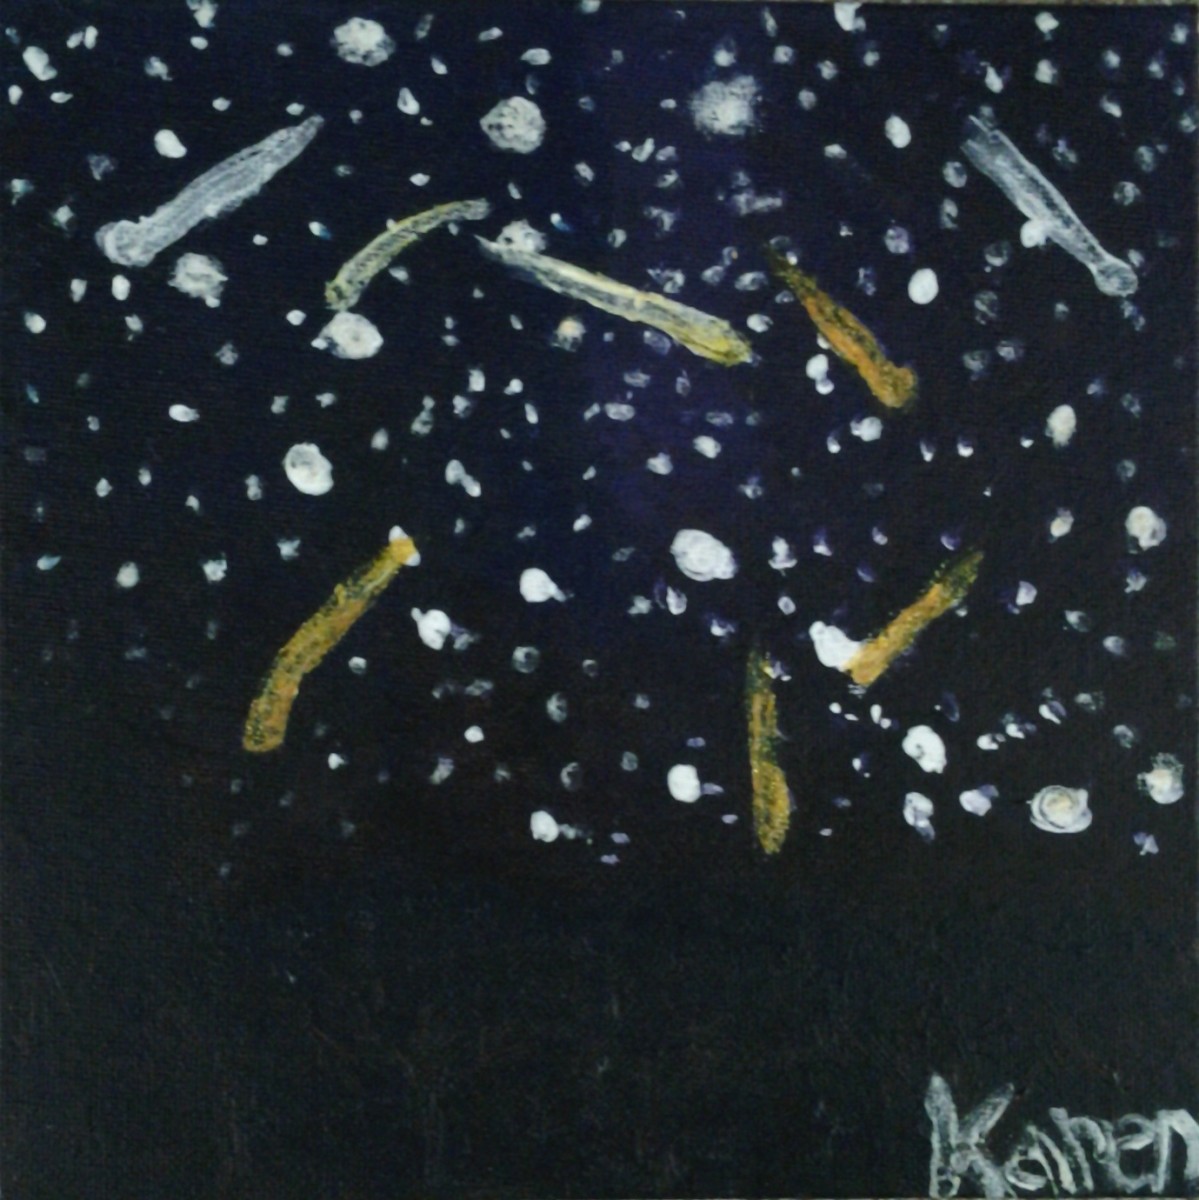 My most recent painting of Perseid Meteor Showers, August 2015